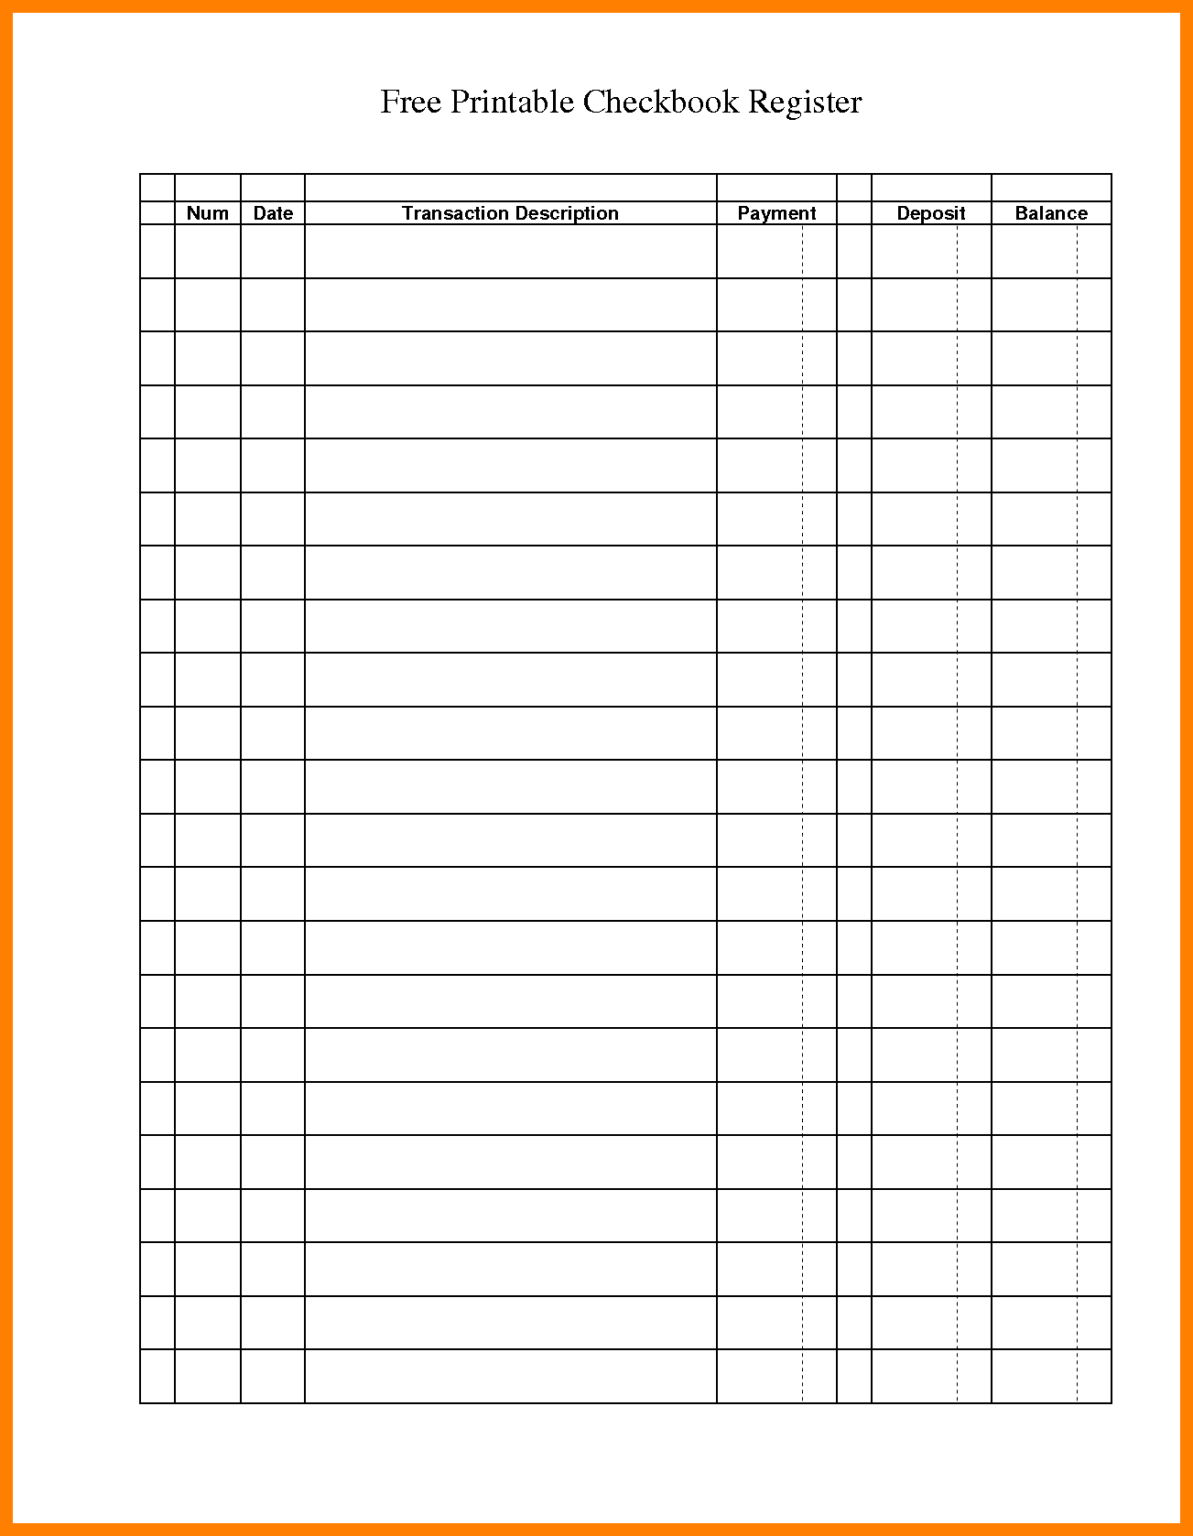 12-free-printable-general-ledger-template-st-with-blank-ledger